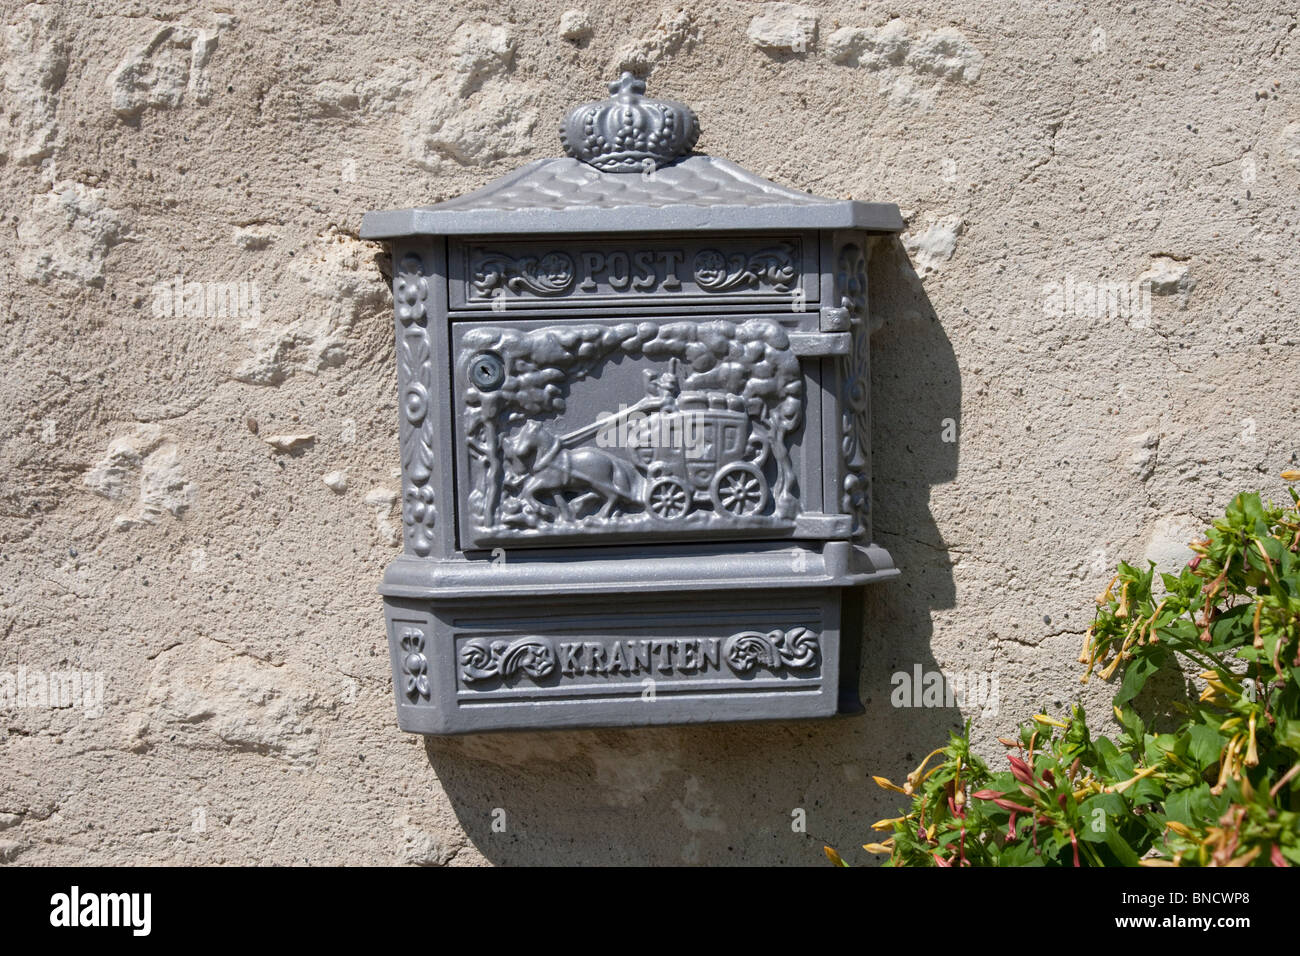 Postbox in the Auvergne, France. Stock Photo